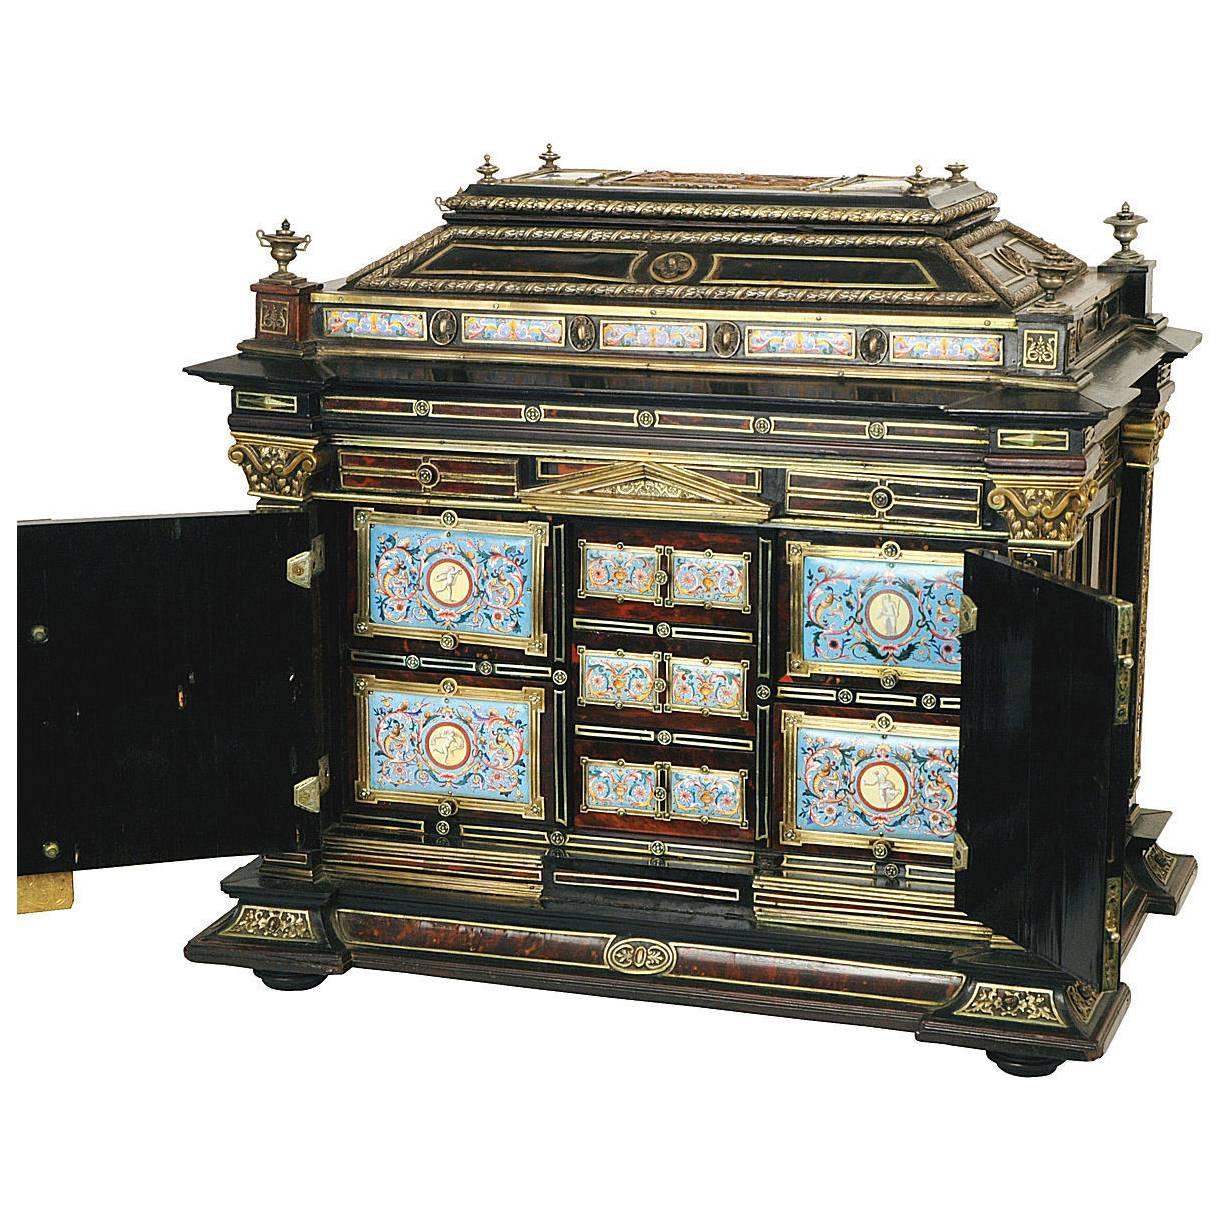 Highly Important Silver & Viennese Enamel Mounted Repousse Shell Casket Cabinet